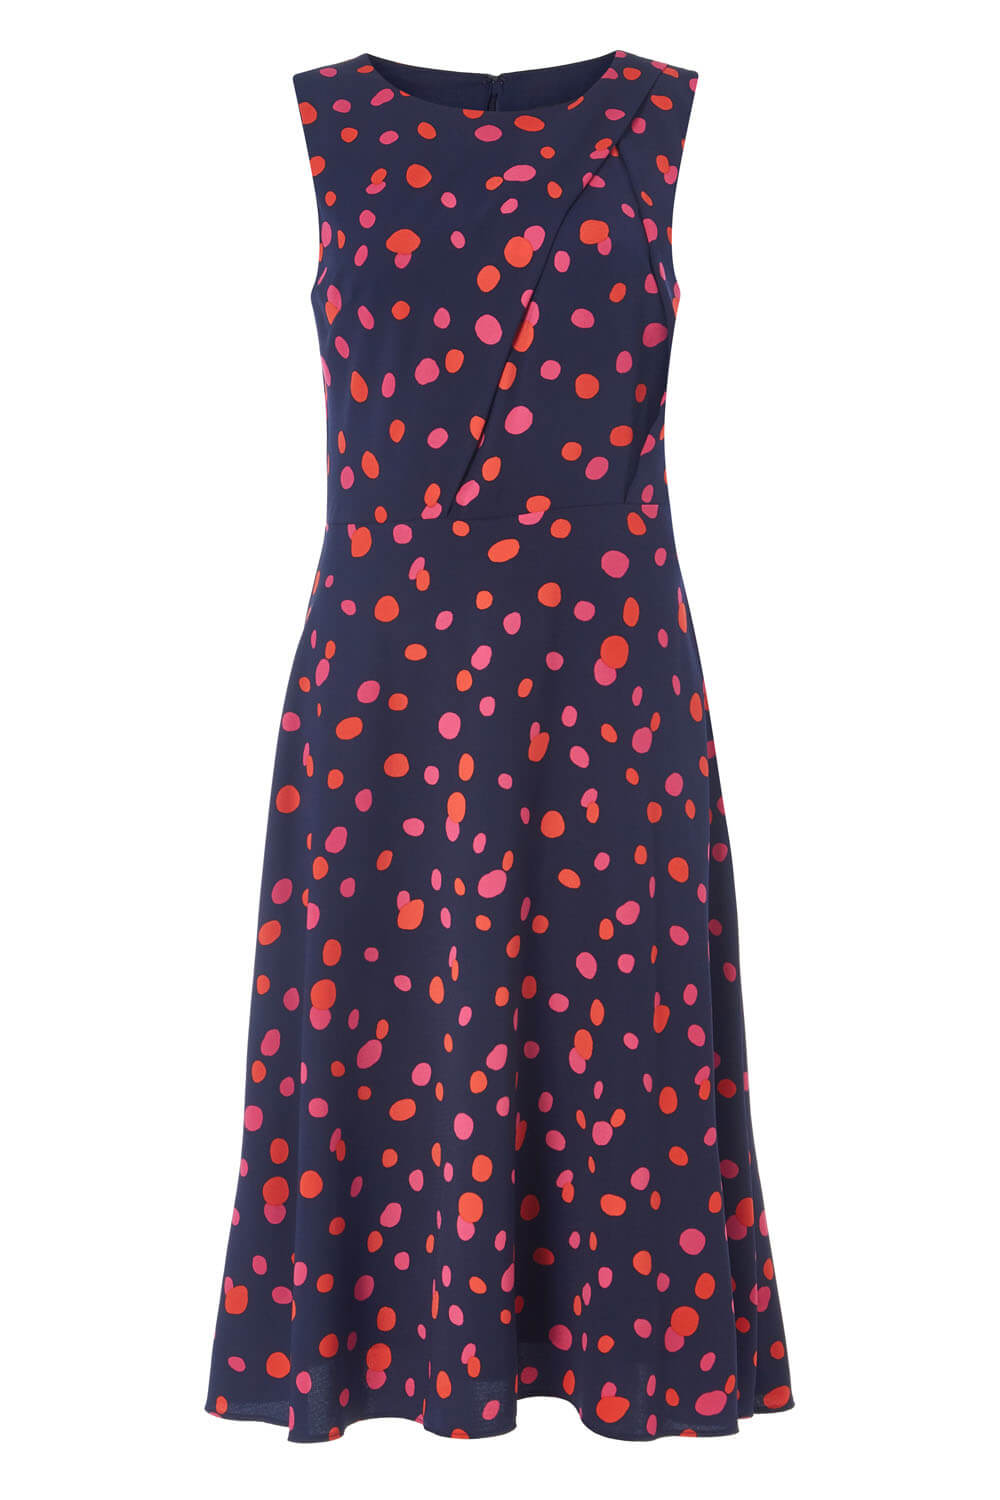 Navy  Polka Dot Fit and Flare Dress, Image 5 of 5